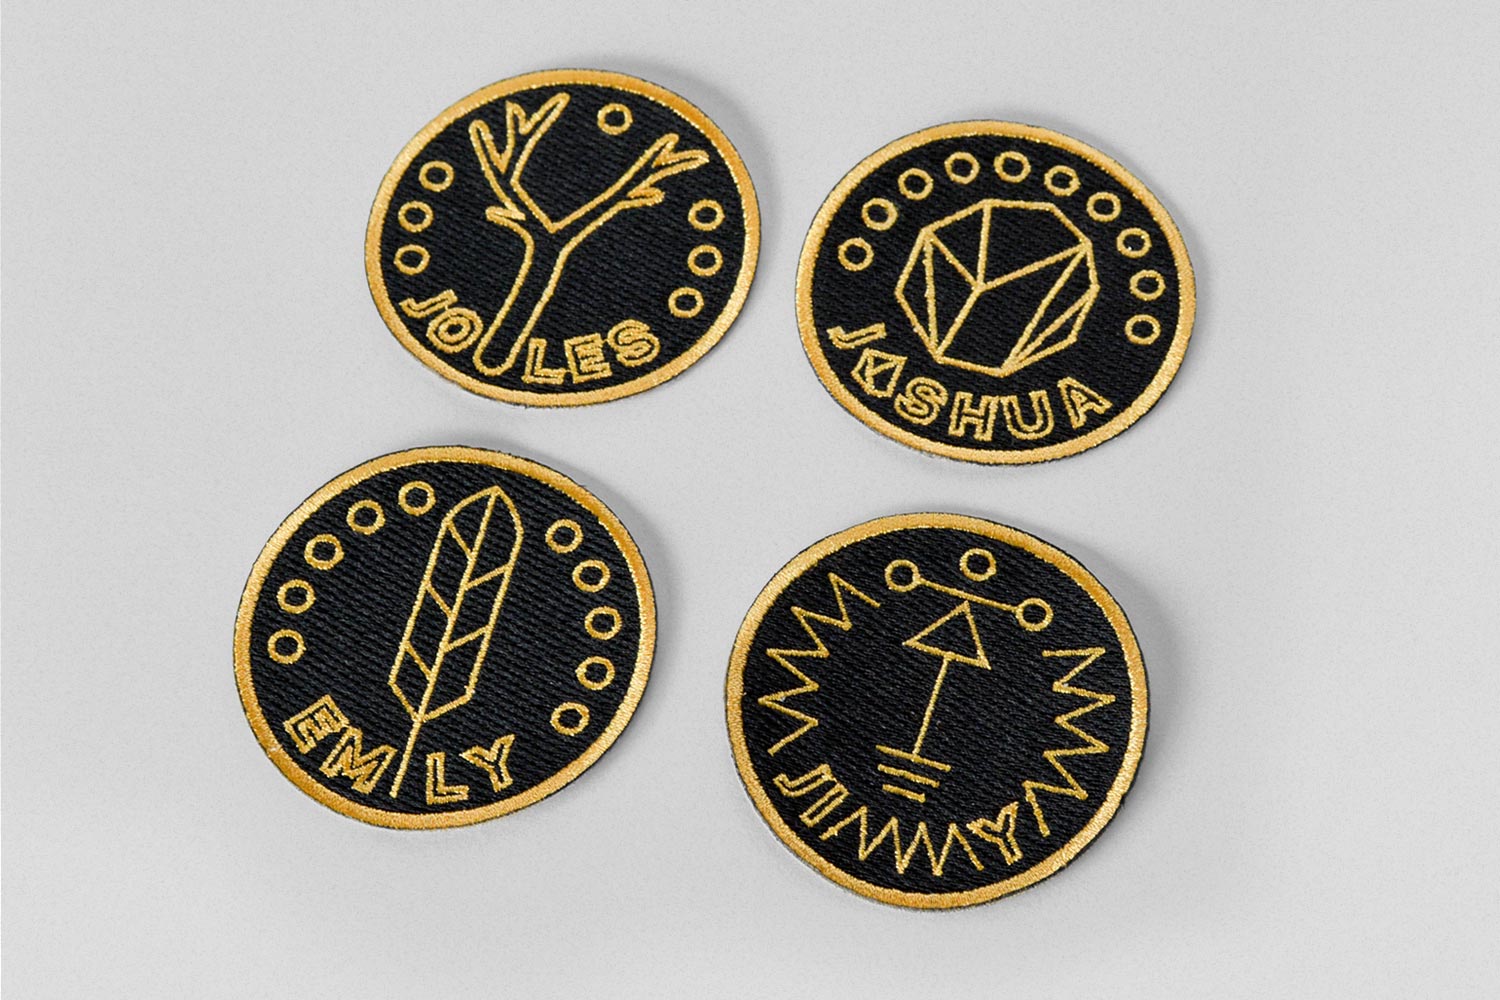 Metric Pagans in Vegas Patches Design